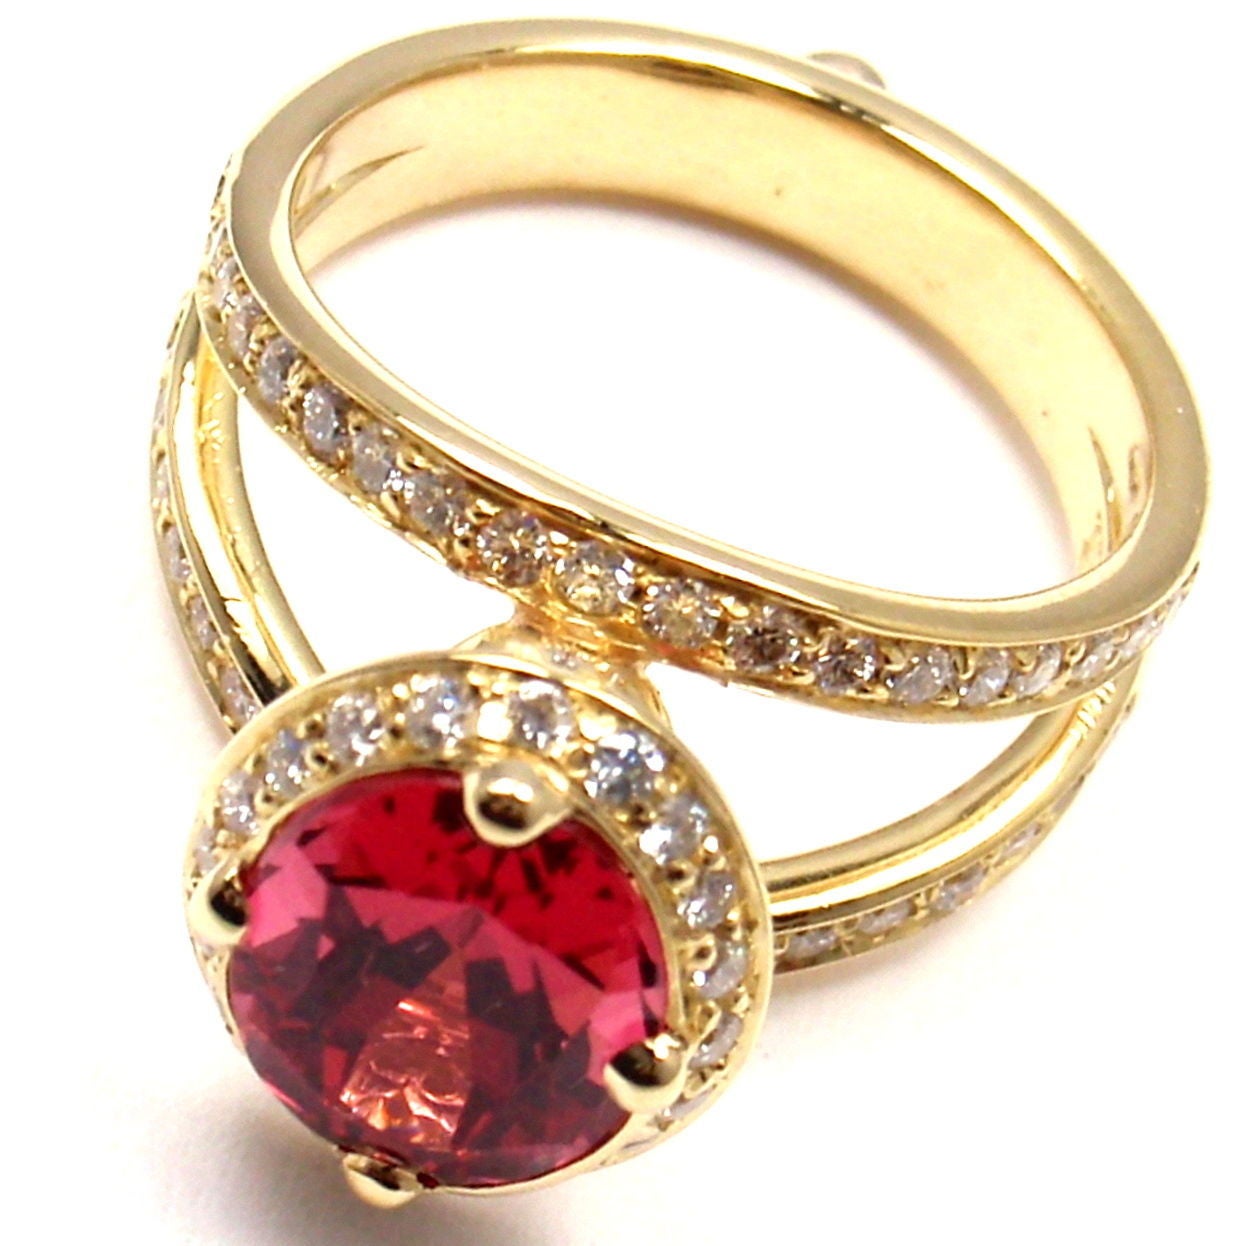 18k Yellow Gold 2.89ct Red Spinel & Diamond Ring by Temple St. Clair. 
Total Diamond Weight: .715ct. With one incredible Red Spinal Stone. 
Total Red Spinel Weight: 2.89ct.
This ring comes with AGL certificate and Temple St. Clair tag,